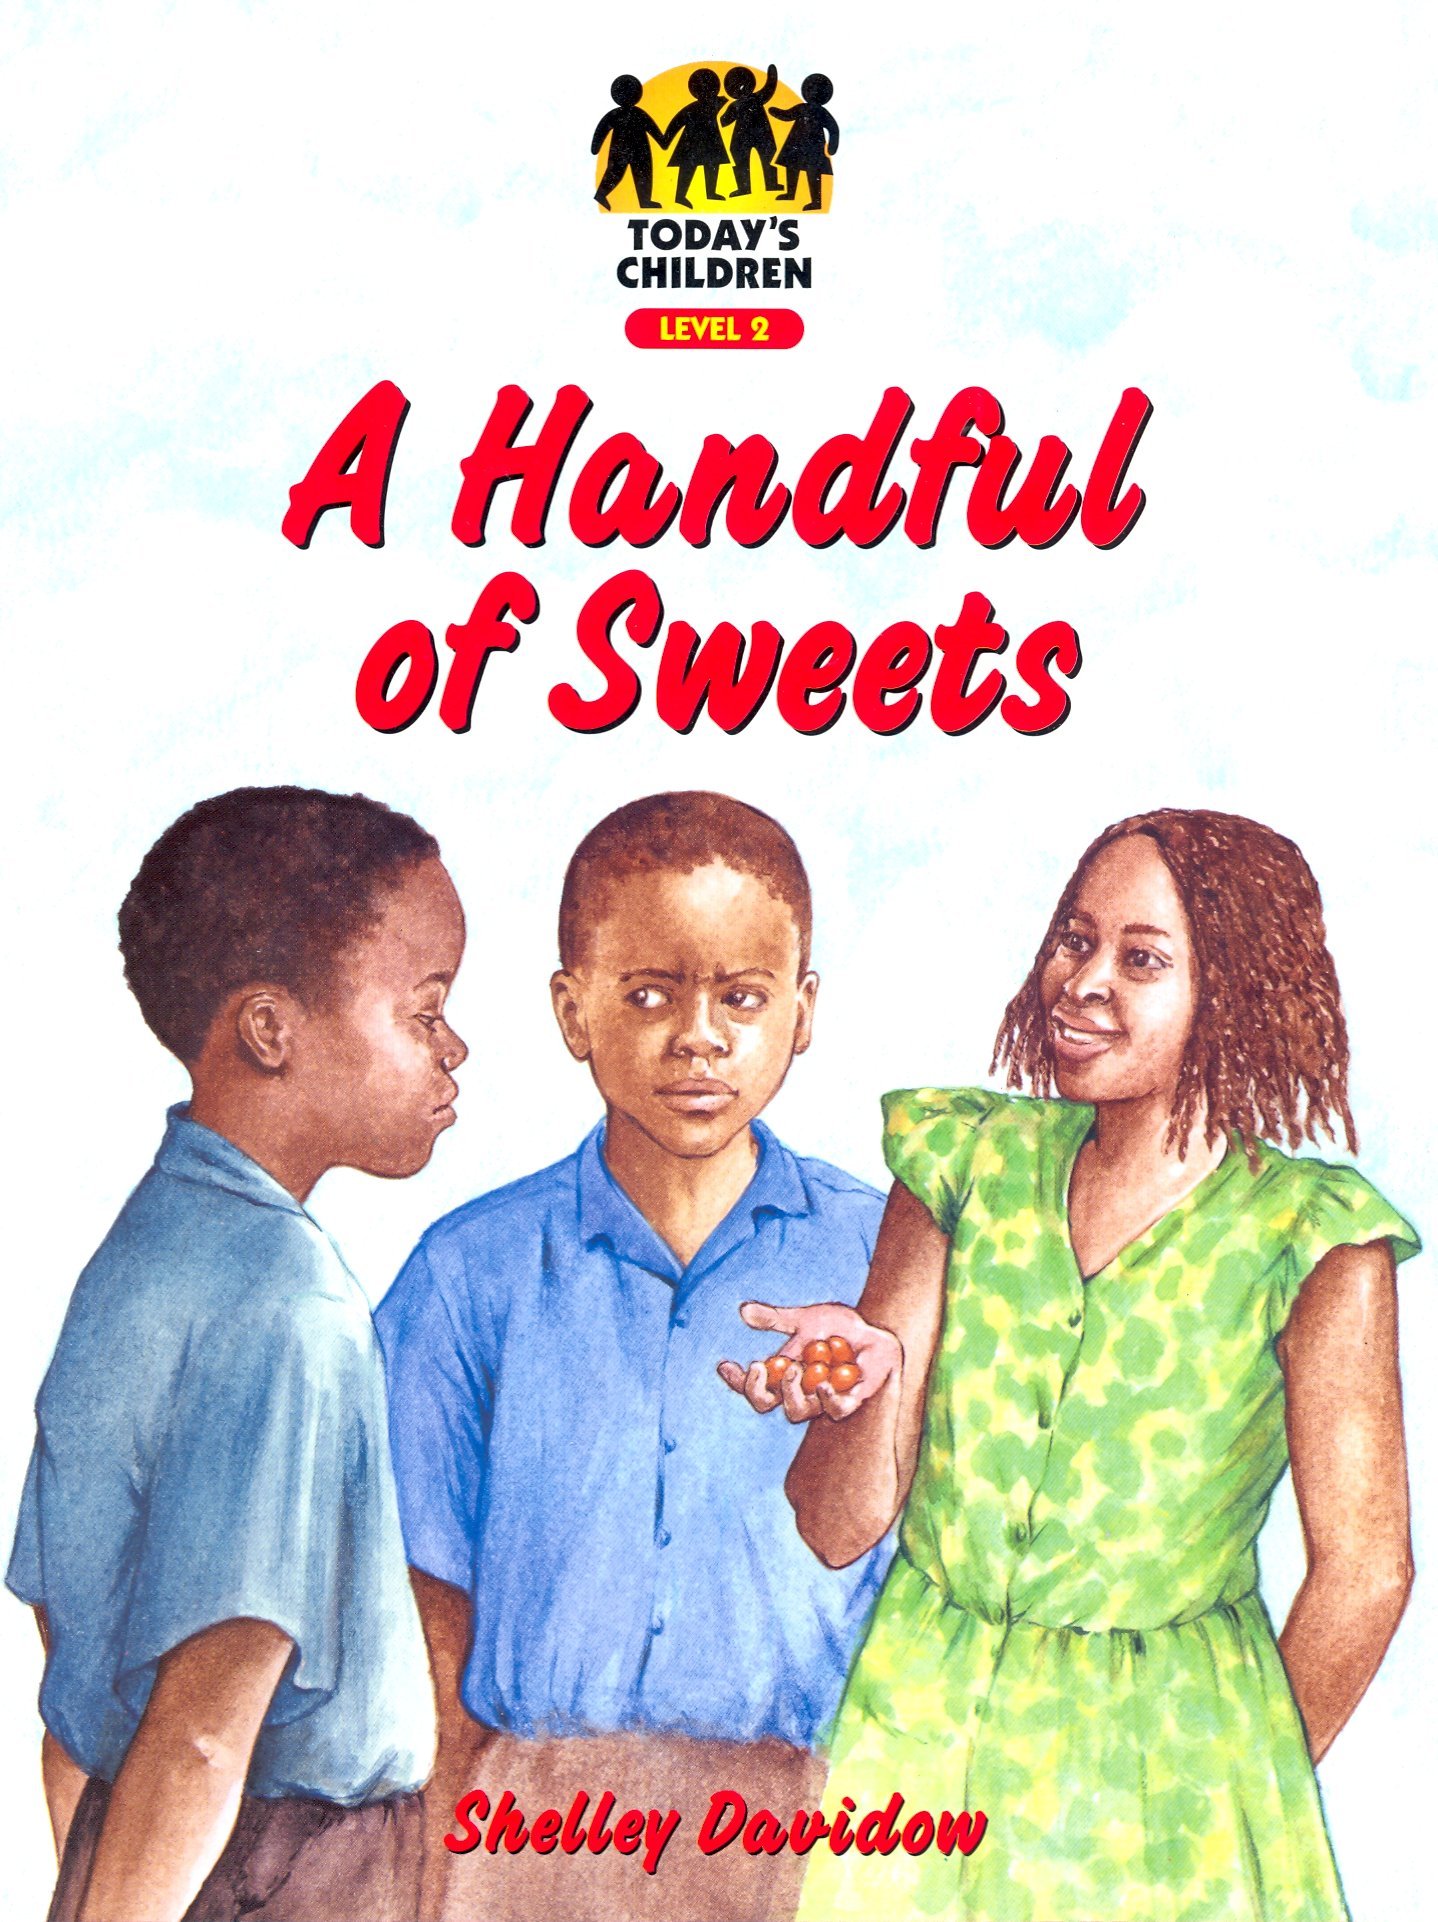 A Handful of Sweets- Level 2 (Today's Children) by Shelley Davidow